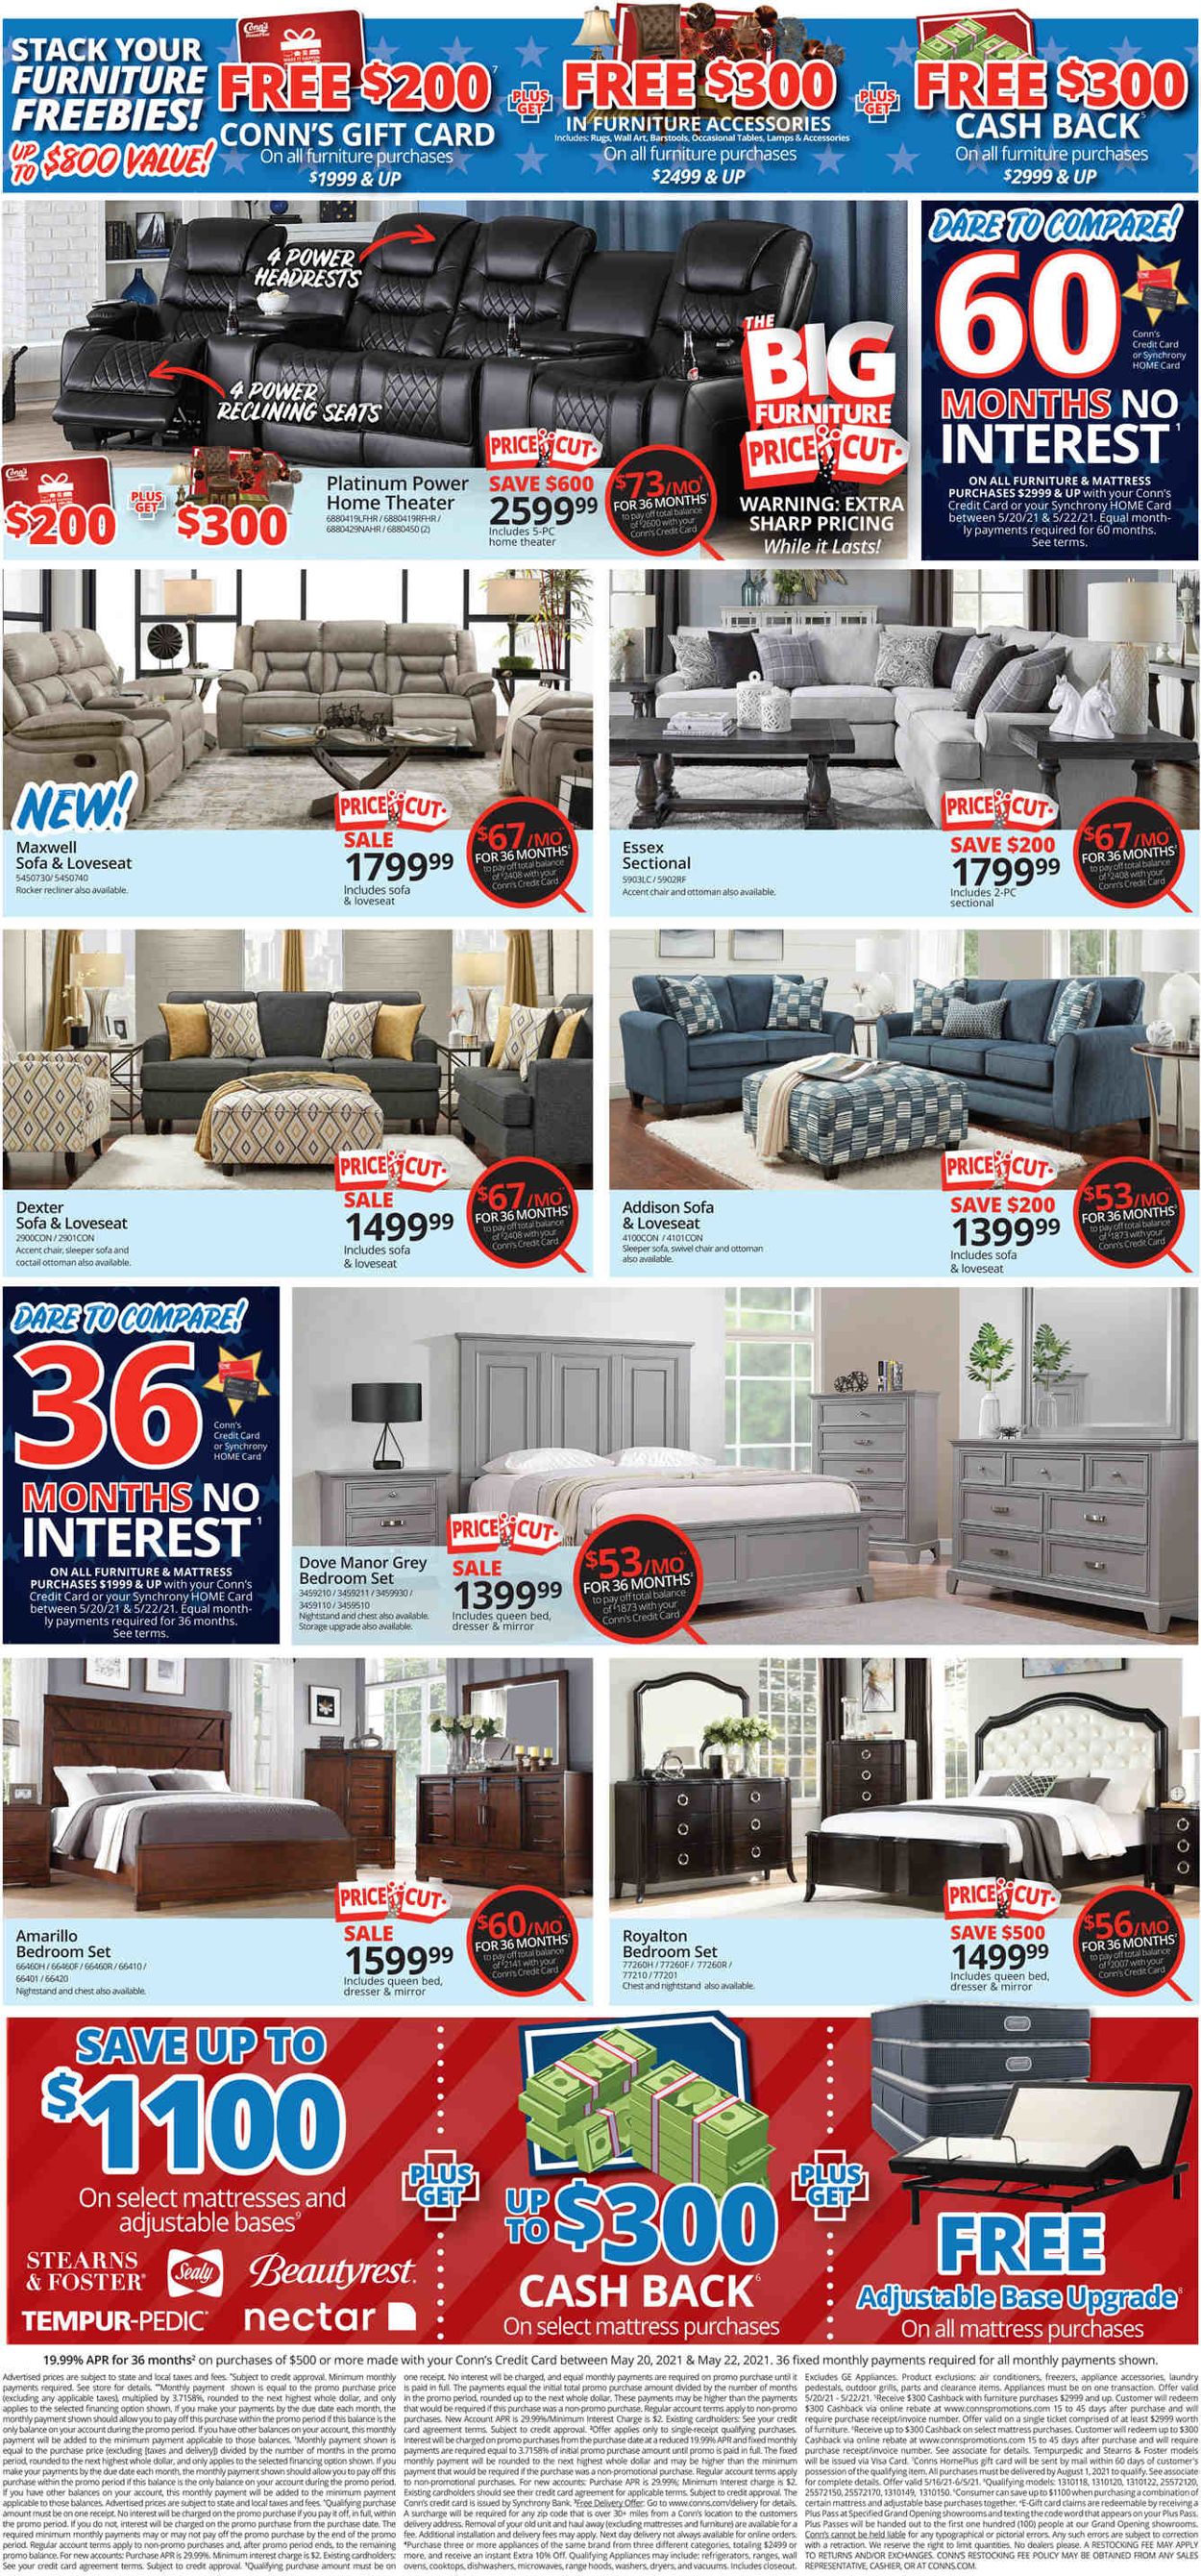 Conn's Home Plus Ad from 05/20/2021